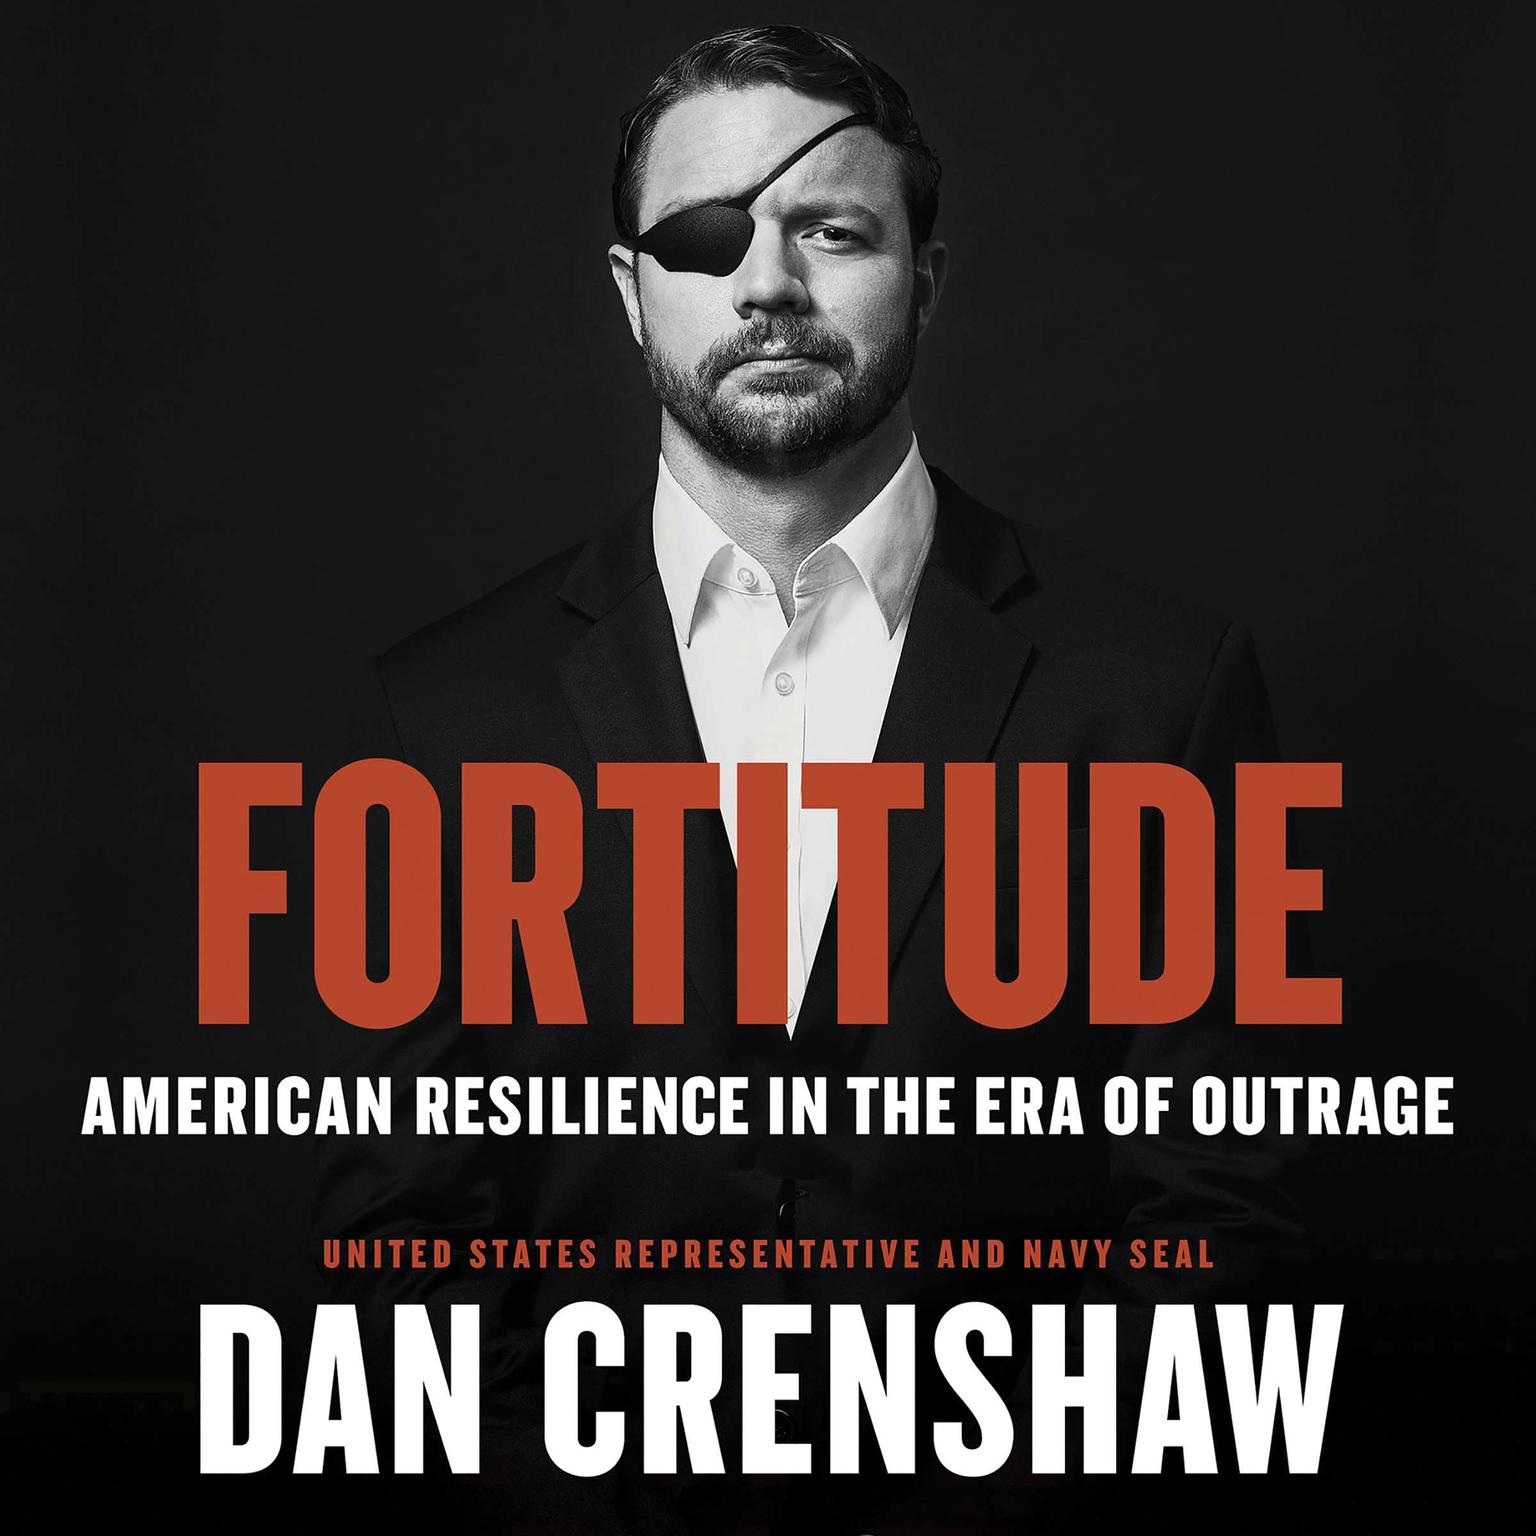 Fortitude: American Resilience in the Era of Outrage Audiobook, by Dan Crenshaw